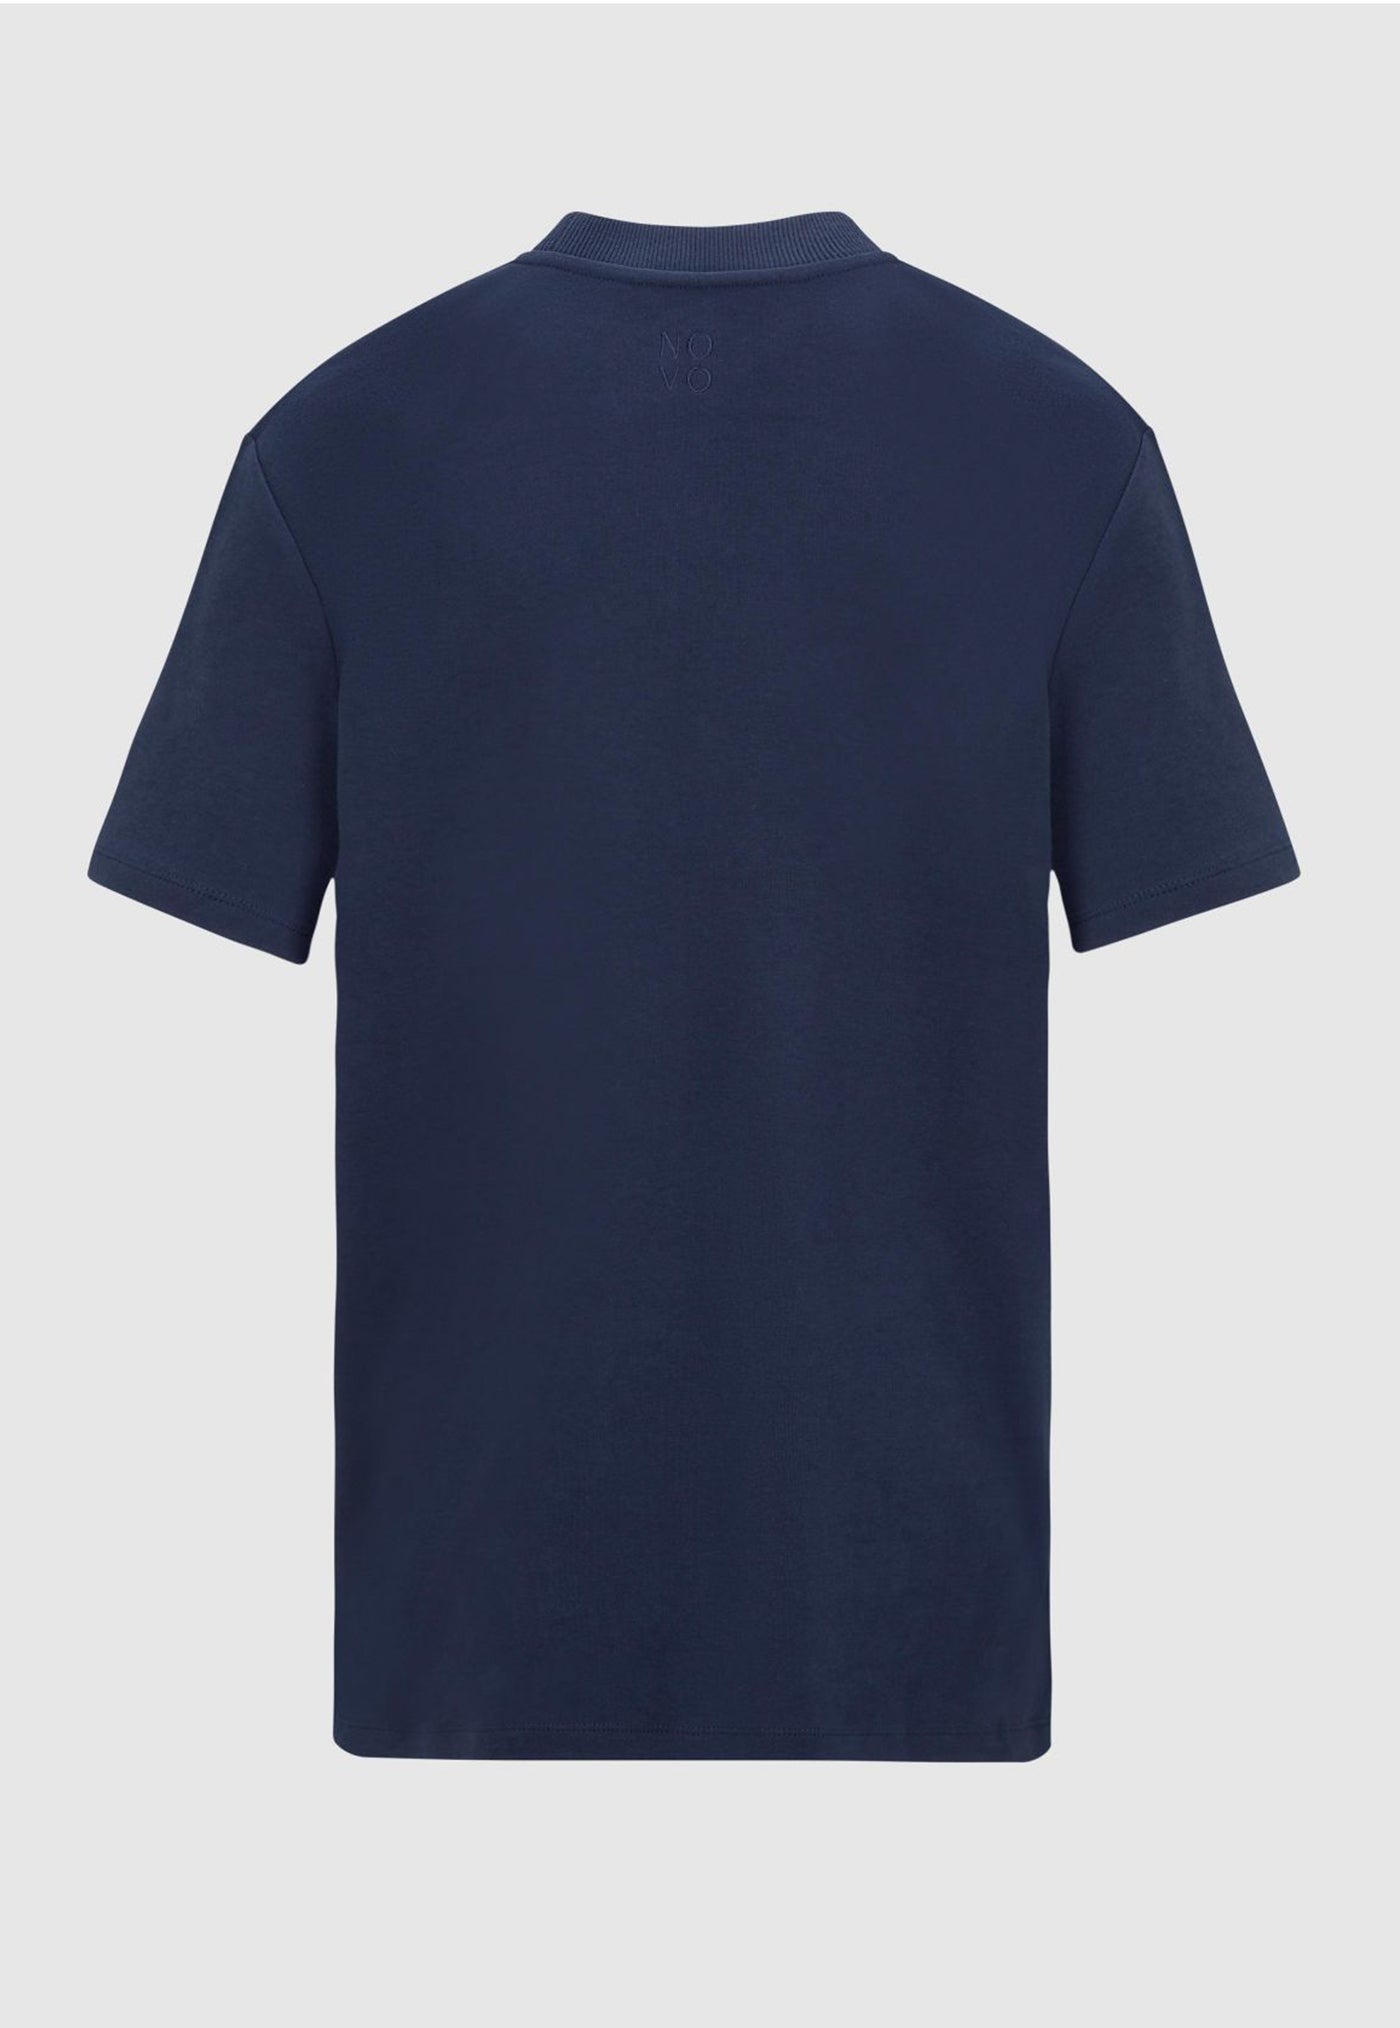 Organic Cotton T-Shirt - Navy sold by Angel Divine